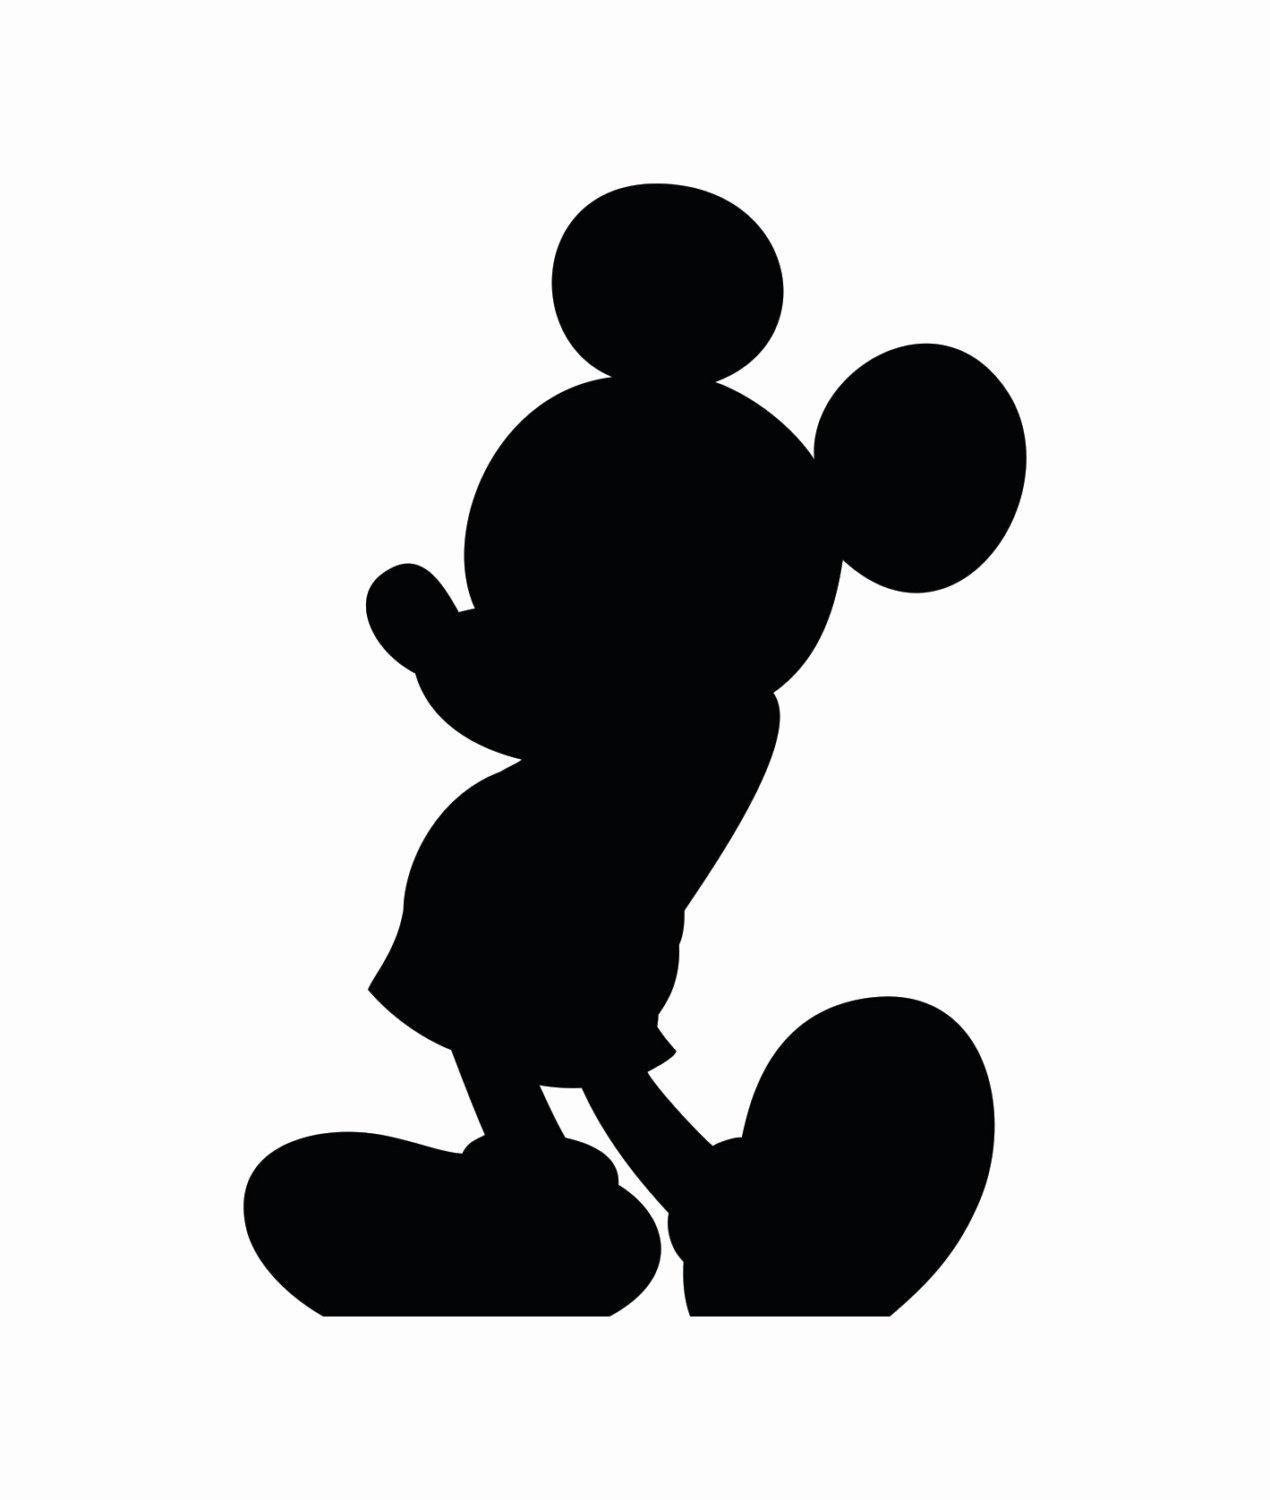 Mickey Mouse Silhouette Printable Inspirational Mickey Mouse Silhouette Vector at Getdrawings